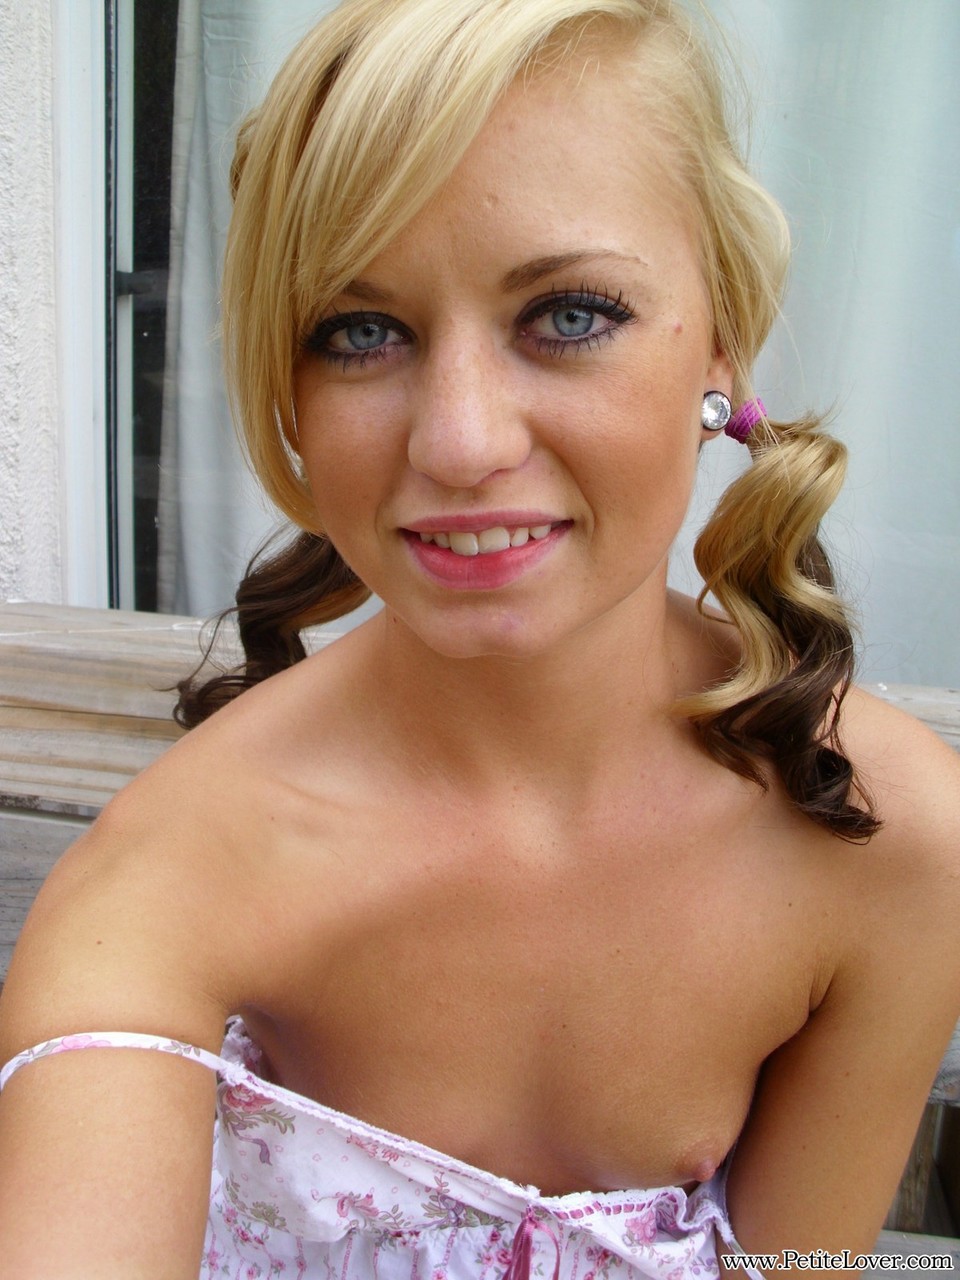 Cute blonde Tiff in pigtails showing off her wee small tits & tiny bald pussy foto pornográfica #428478640 | Petite Lover Pics, Tiff, Amateur, pornografia móvel